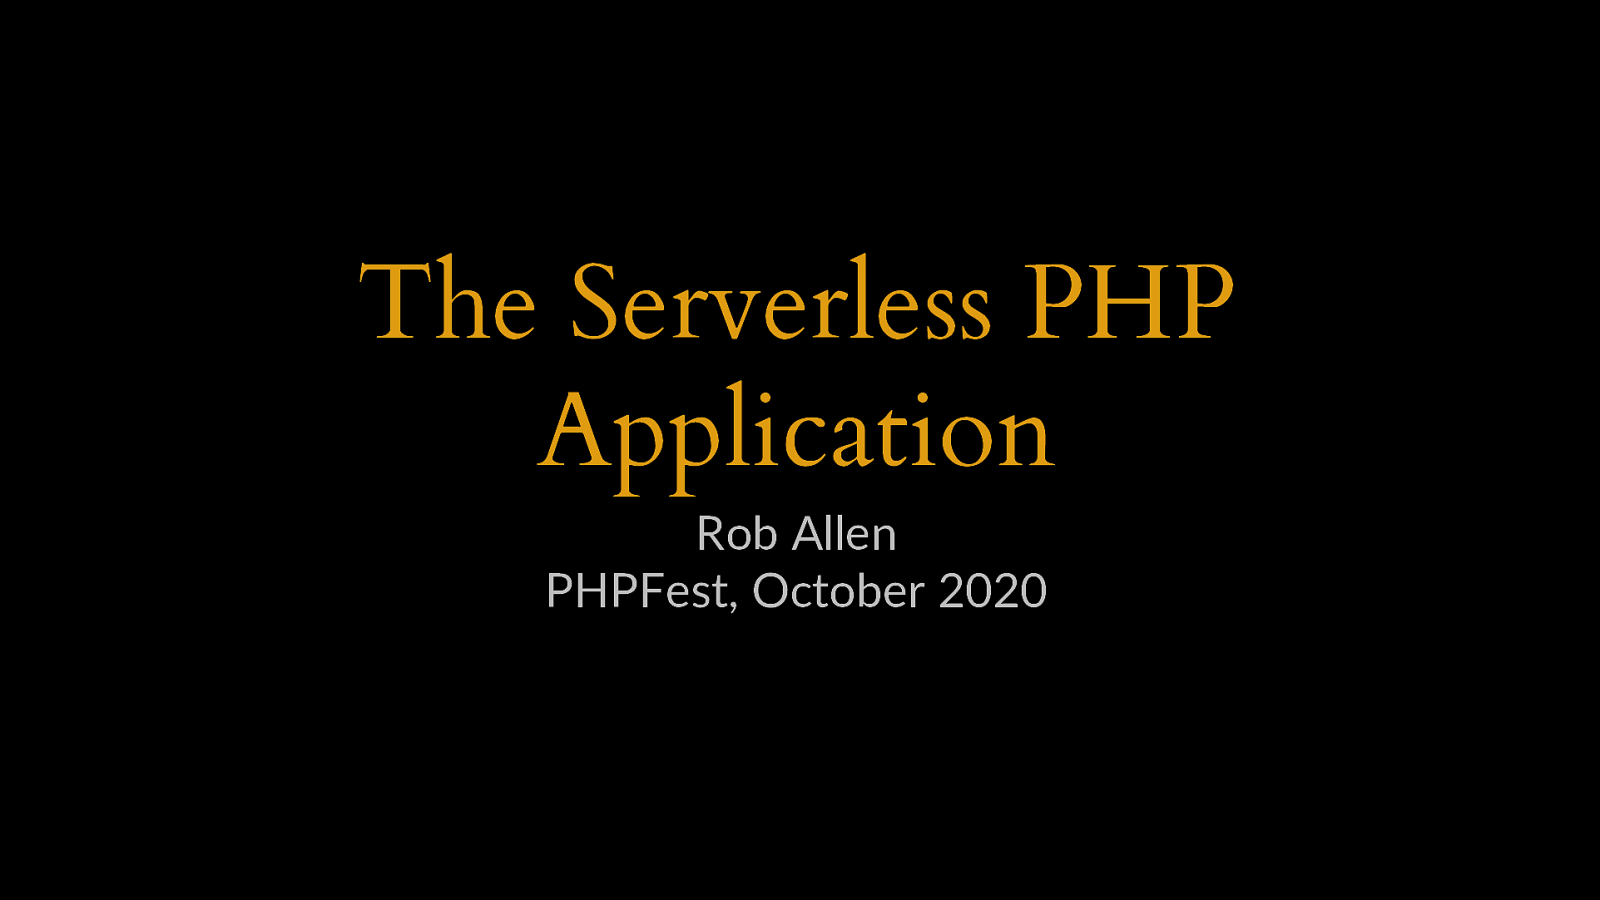 The Serverless PHP Application